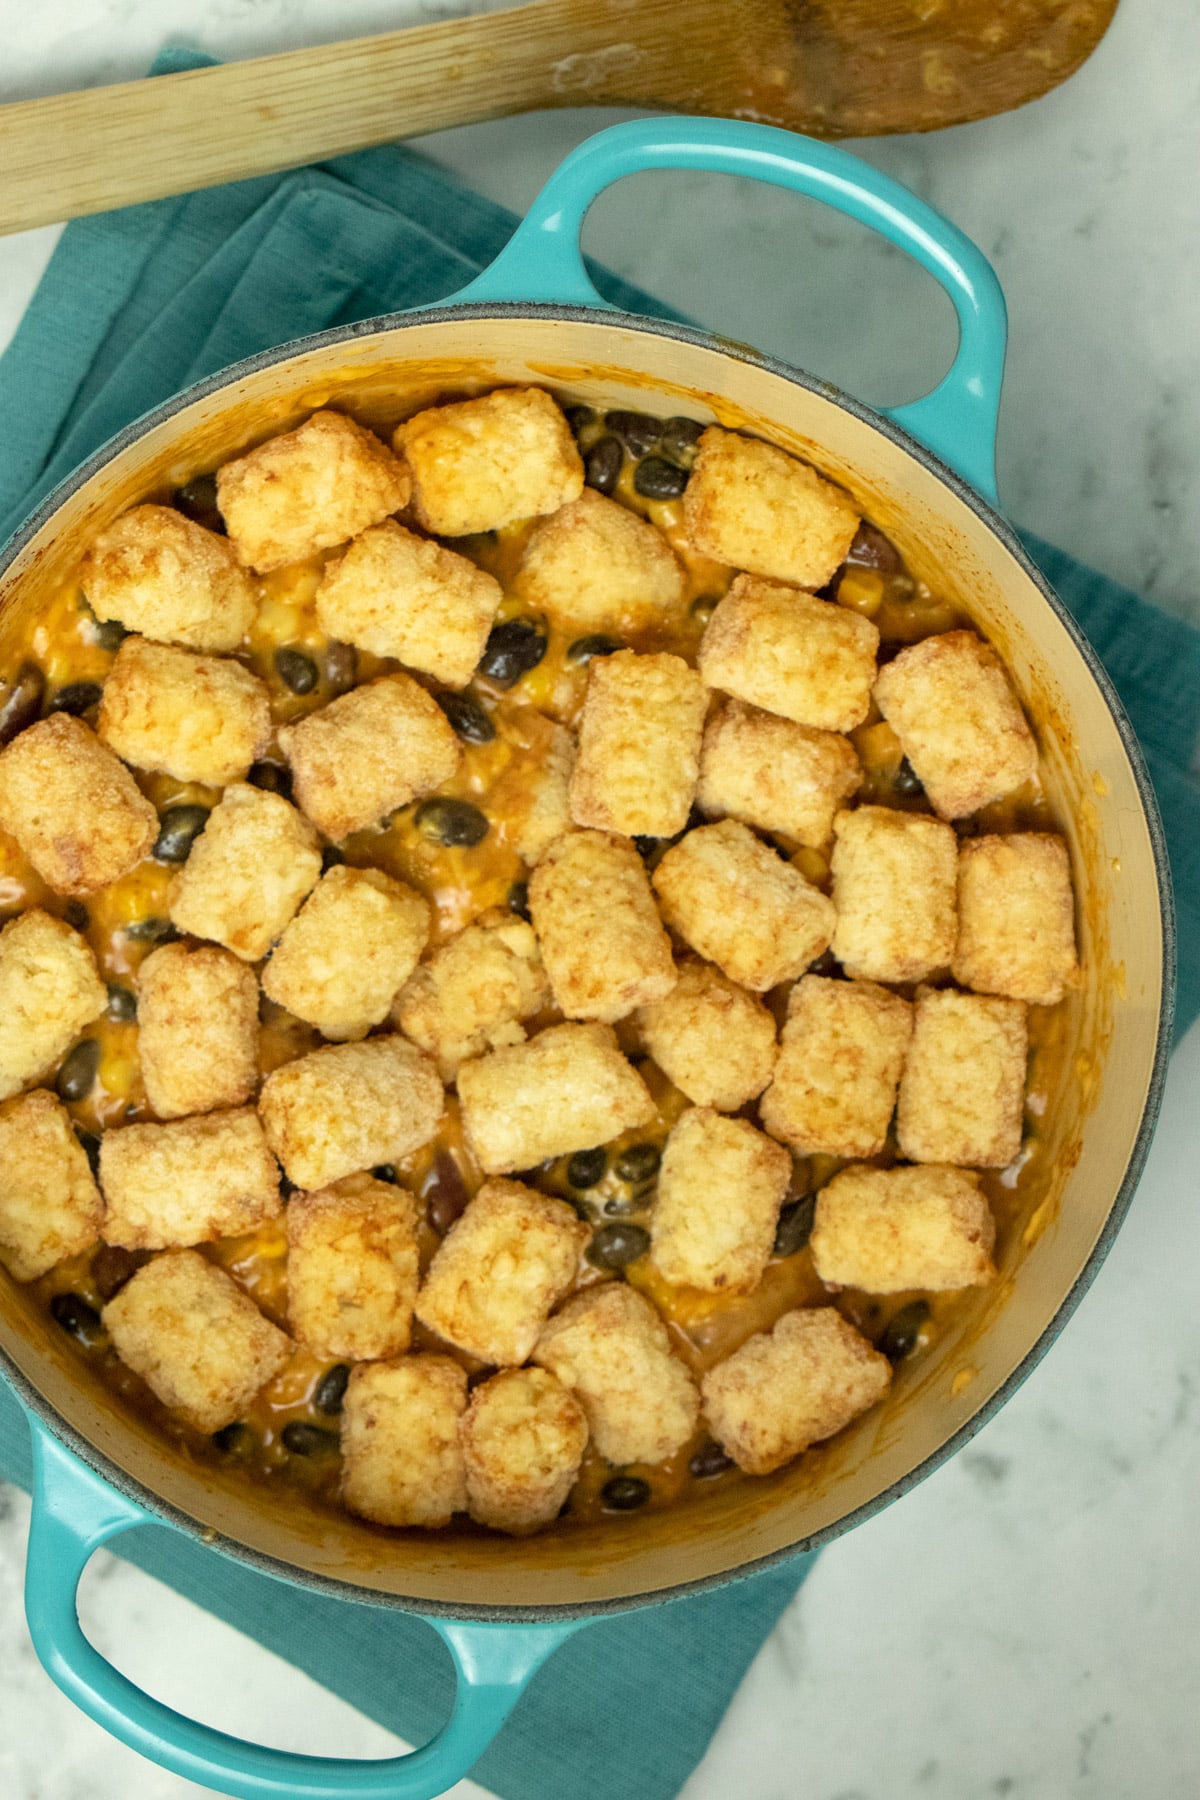 unbaked tater tot casserole in a blue pan, so you can see the single layer of tater tots